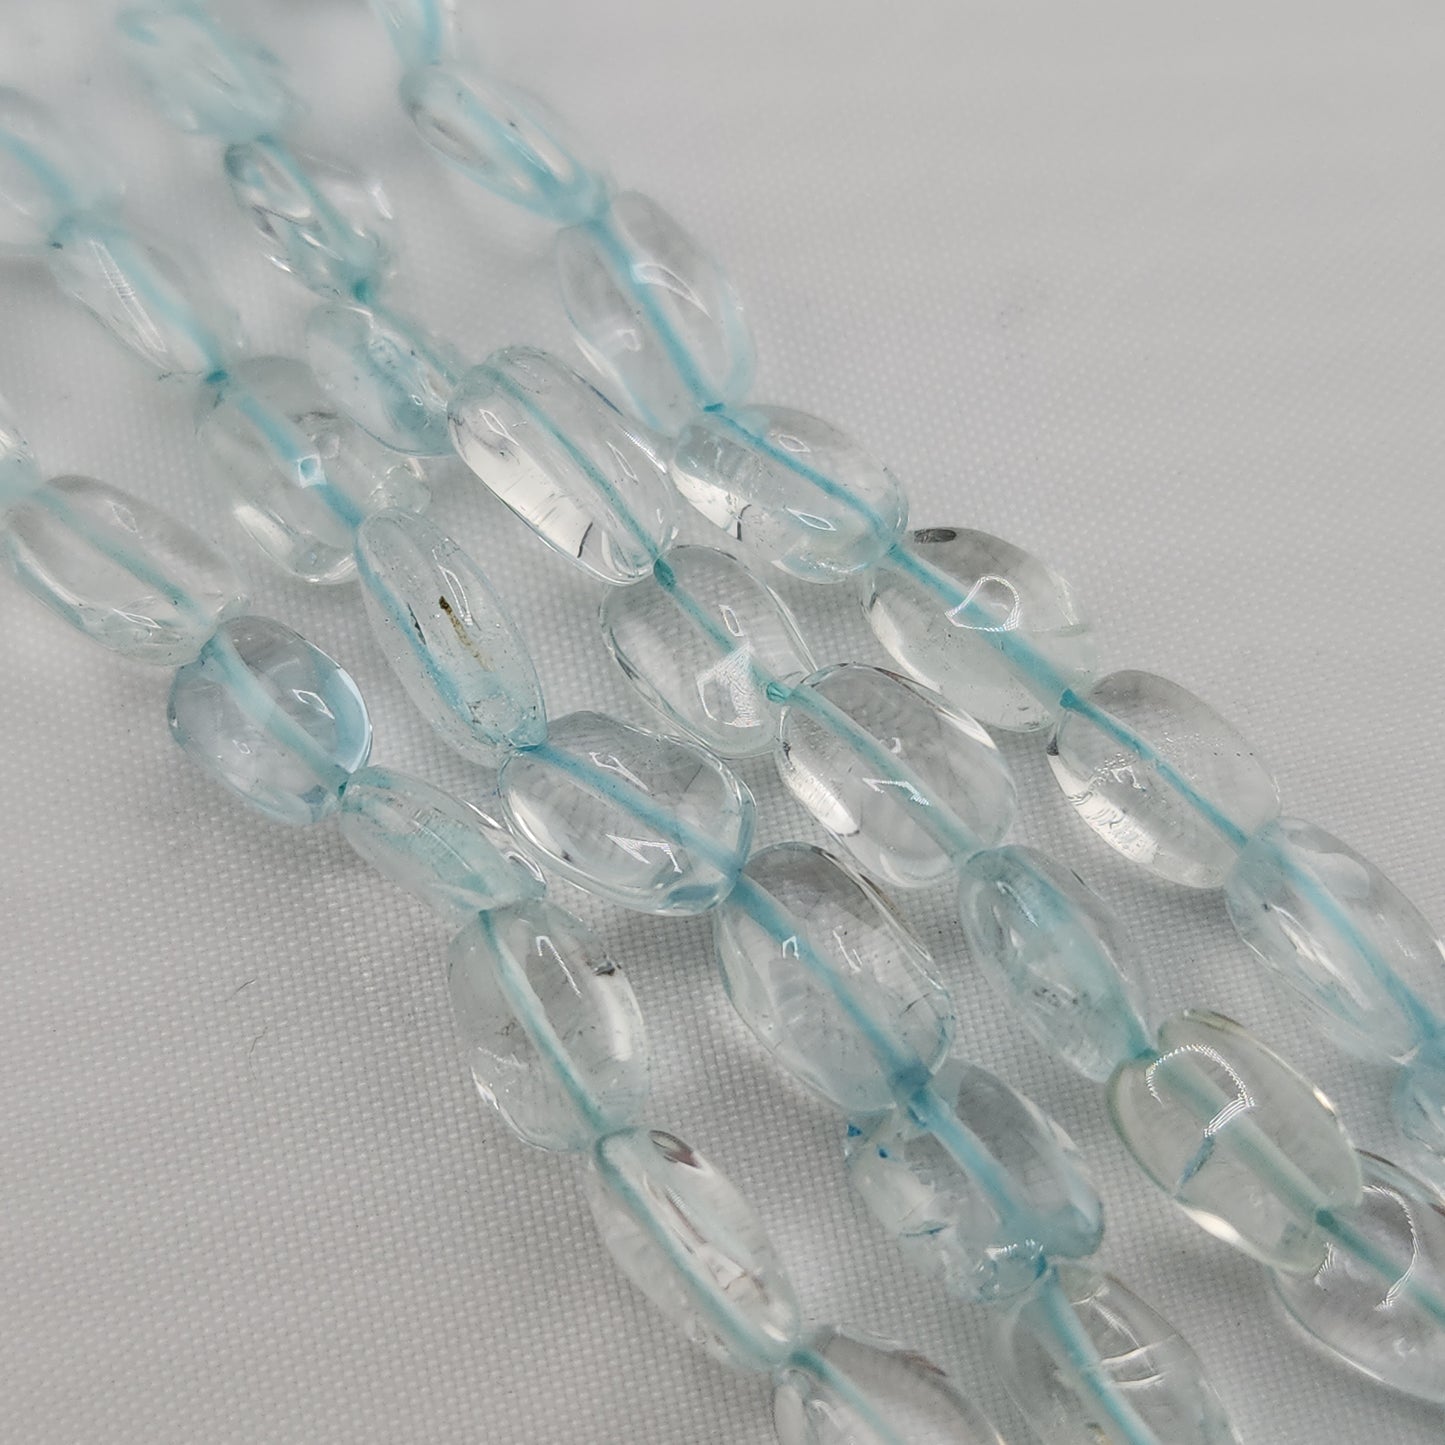 Crafting supplies such as aquamarine beads available at wholesale and retail prices, only at our crystal shop in San Diego!